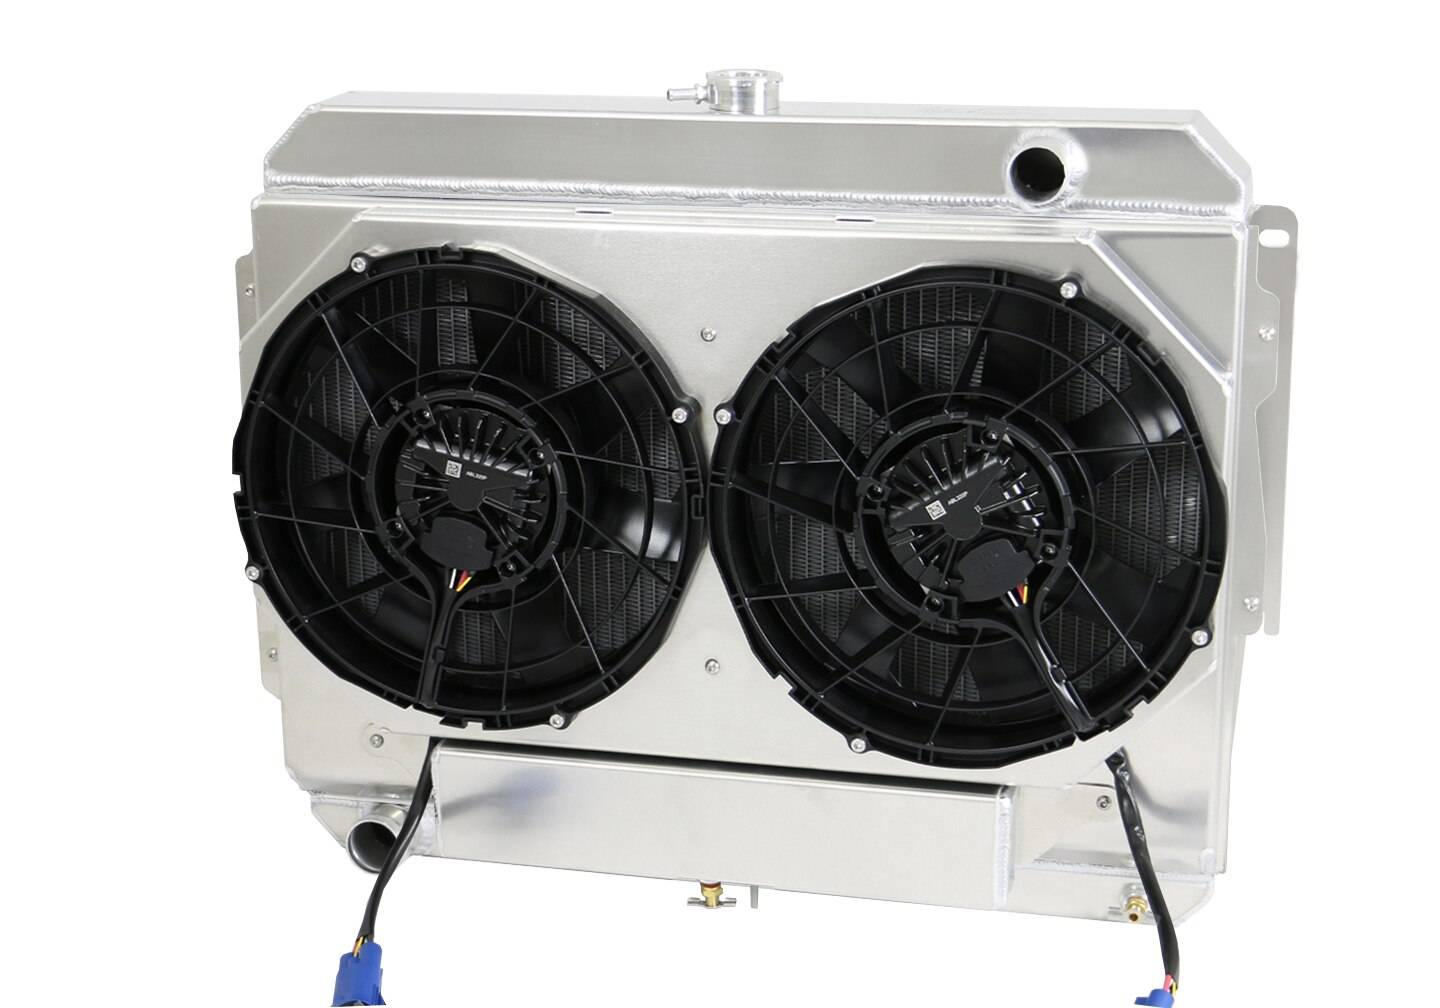 Wizard Cooling Inc - Wizard Cooling - 1966-1969 26", Small Block, Mopar Applications Aluminum Radiator w/ Brushless Fans - 1638-202BLX